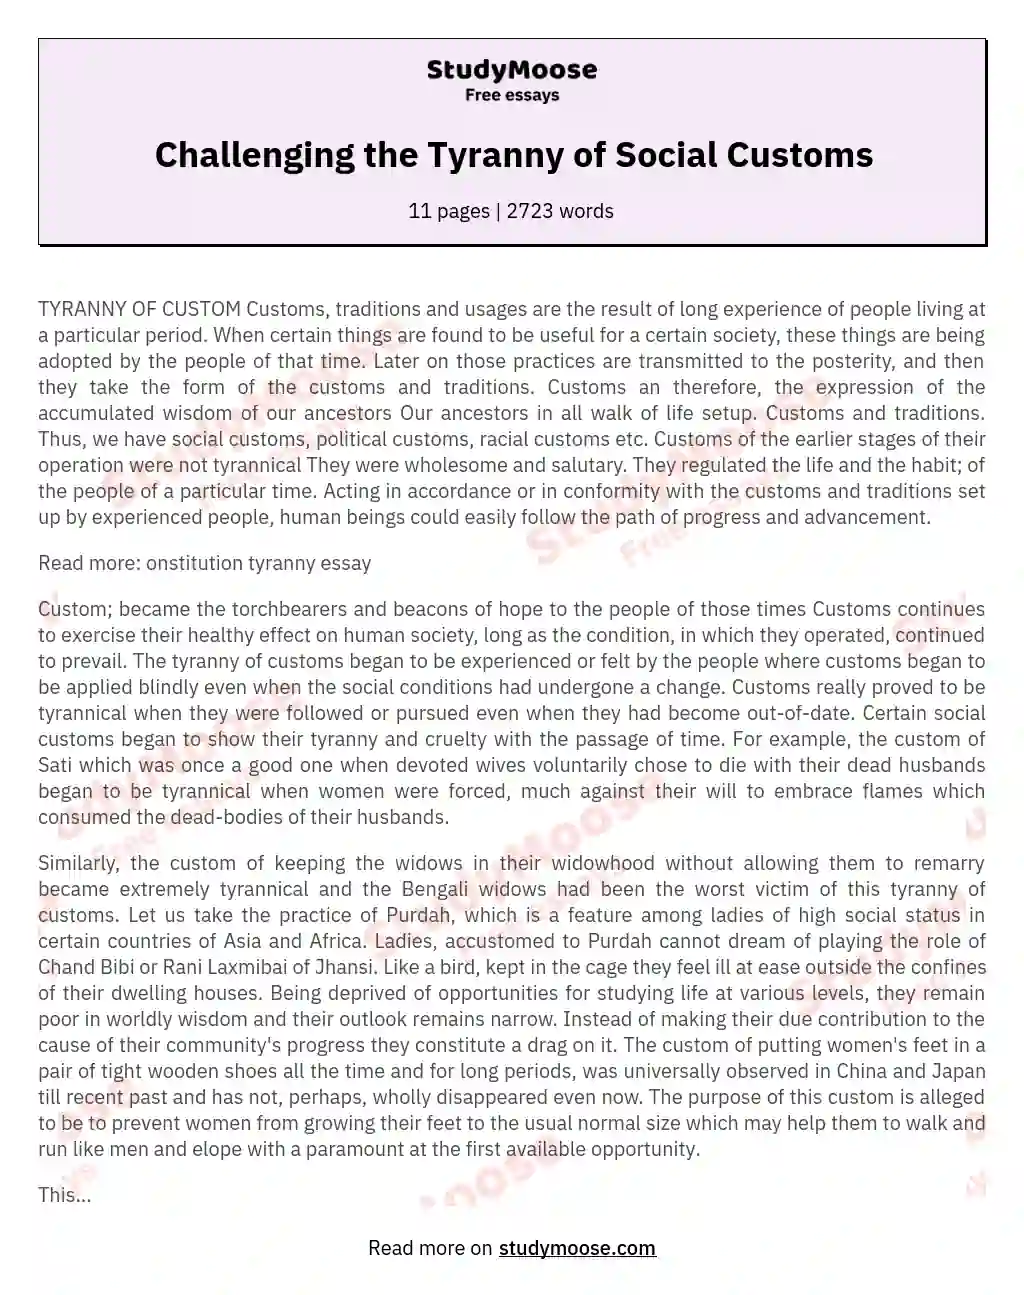 Challenging the Tyranny of Social Customs essay